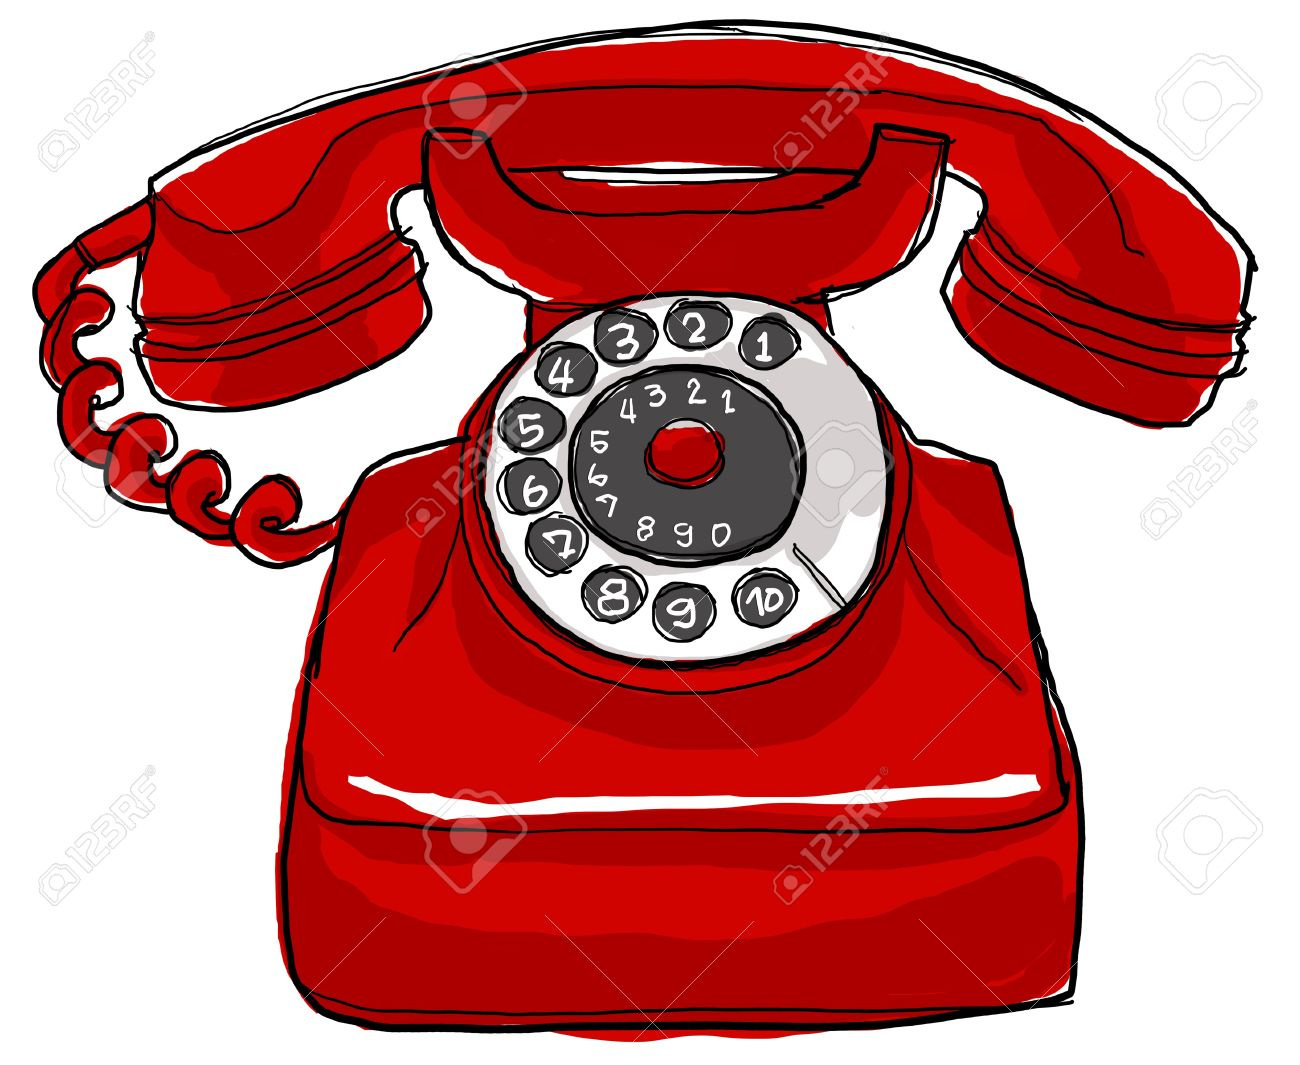 14981444-old-red-telephone-Stock-Photo